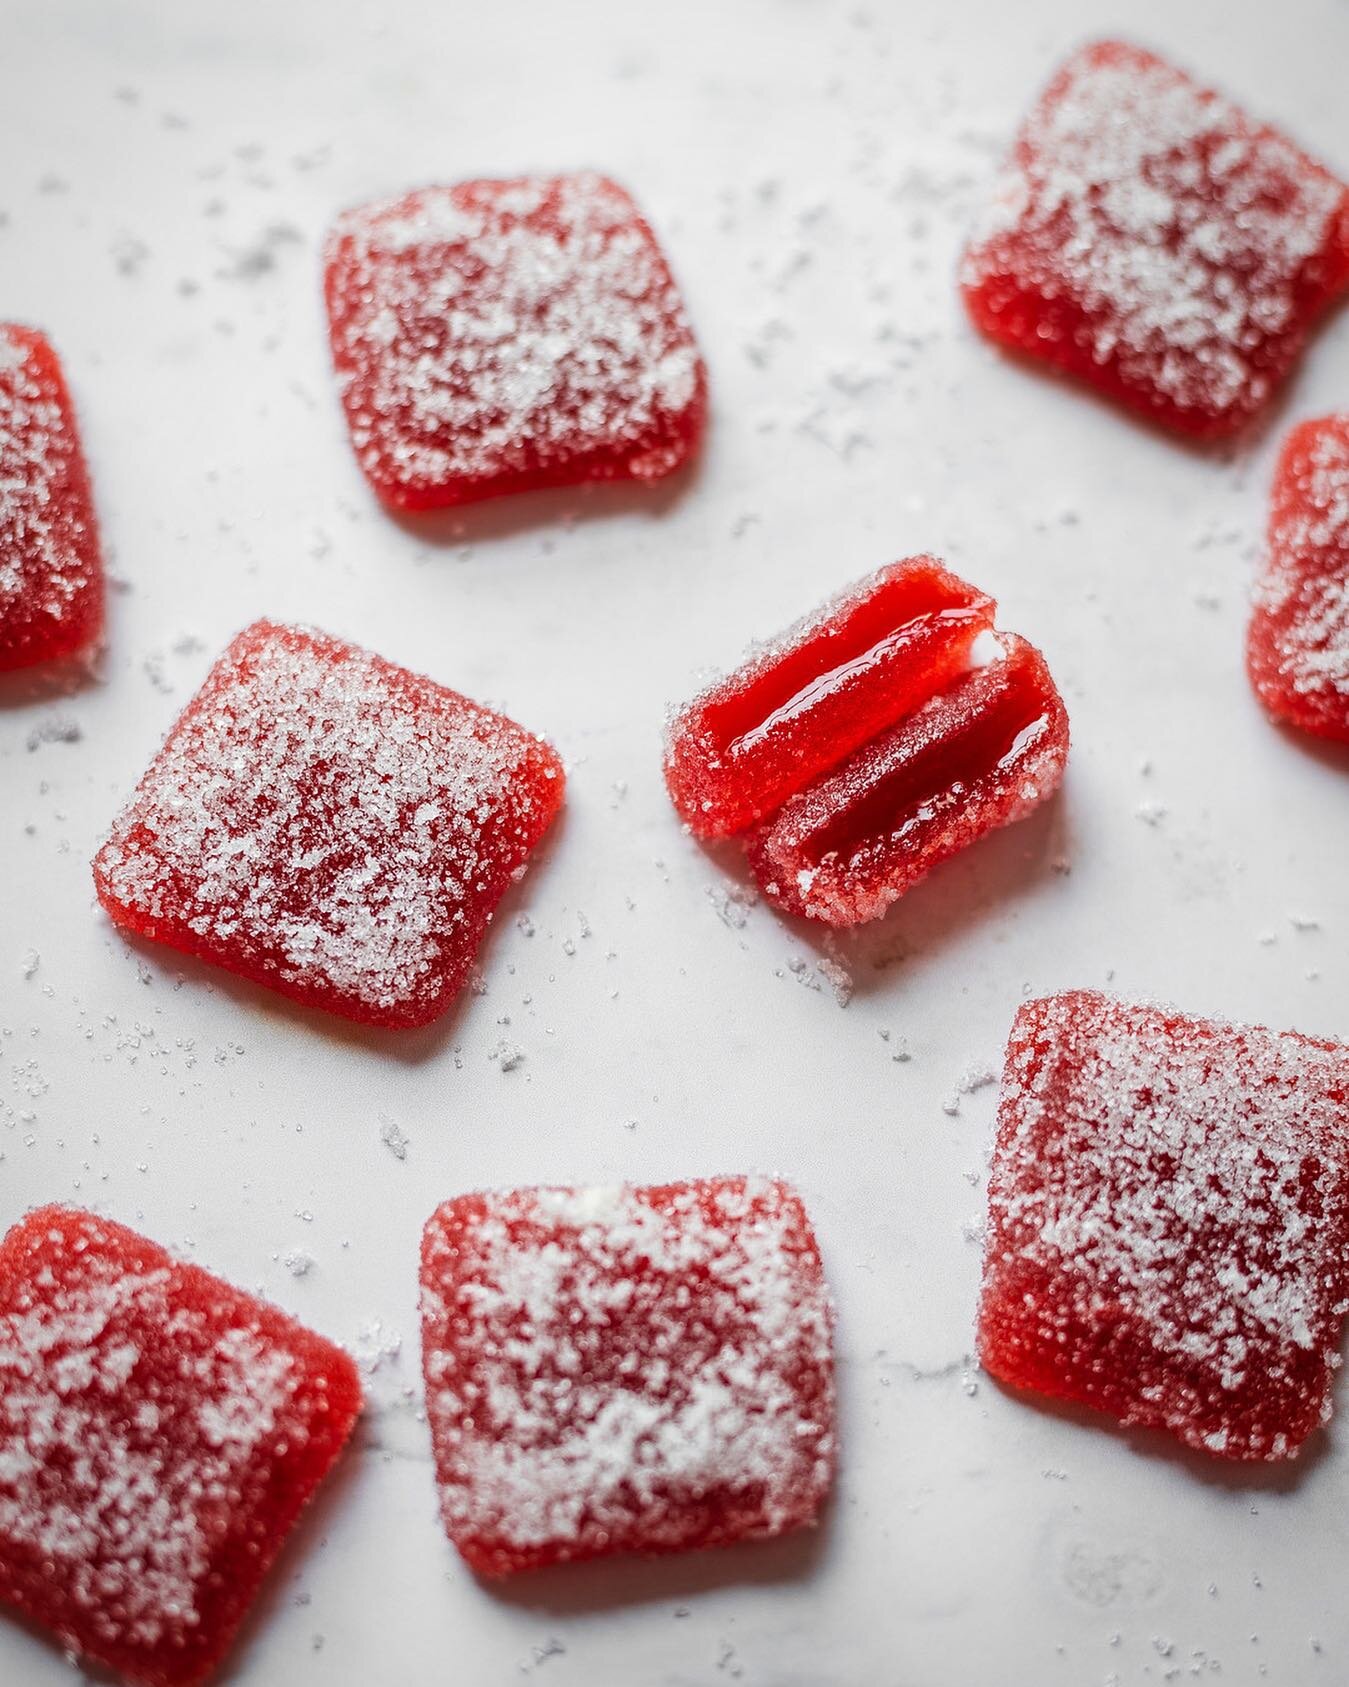 28 year old me is really happy that 14 year old me decided to go through a candy making phase, because this past week I was up to my ears in sugar working on shooting some recipes for @thespruceeats 🍬
⠀⠀⠀⠀⠀⠀⠀⠀⠀
Pictured: Strawberry Pate de Fruits! H